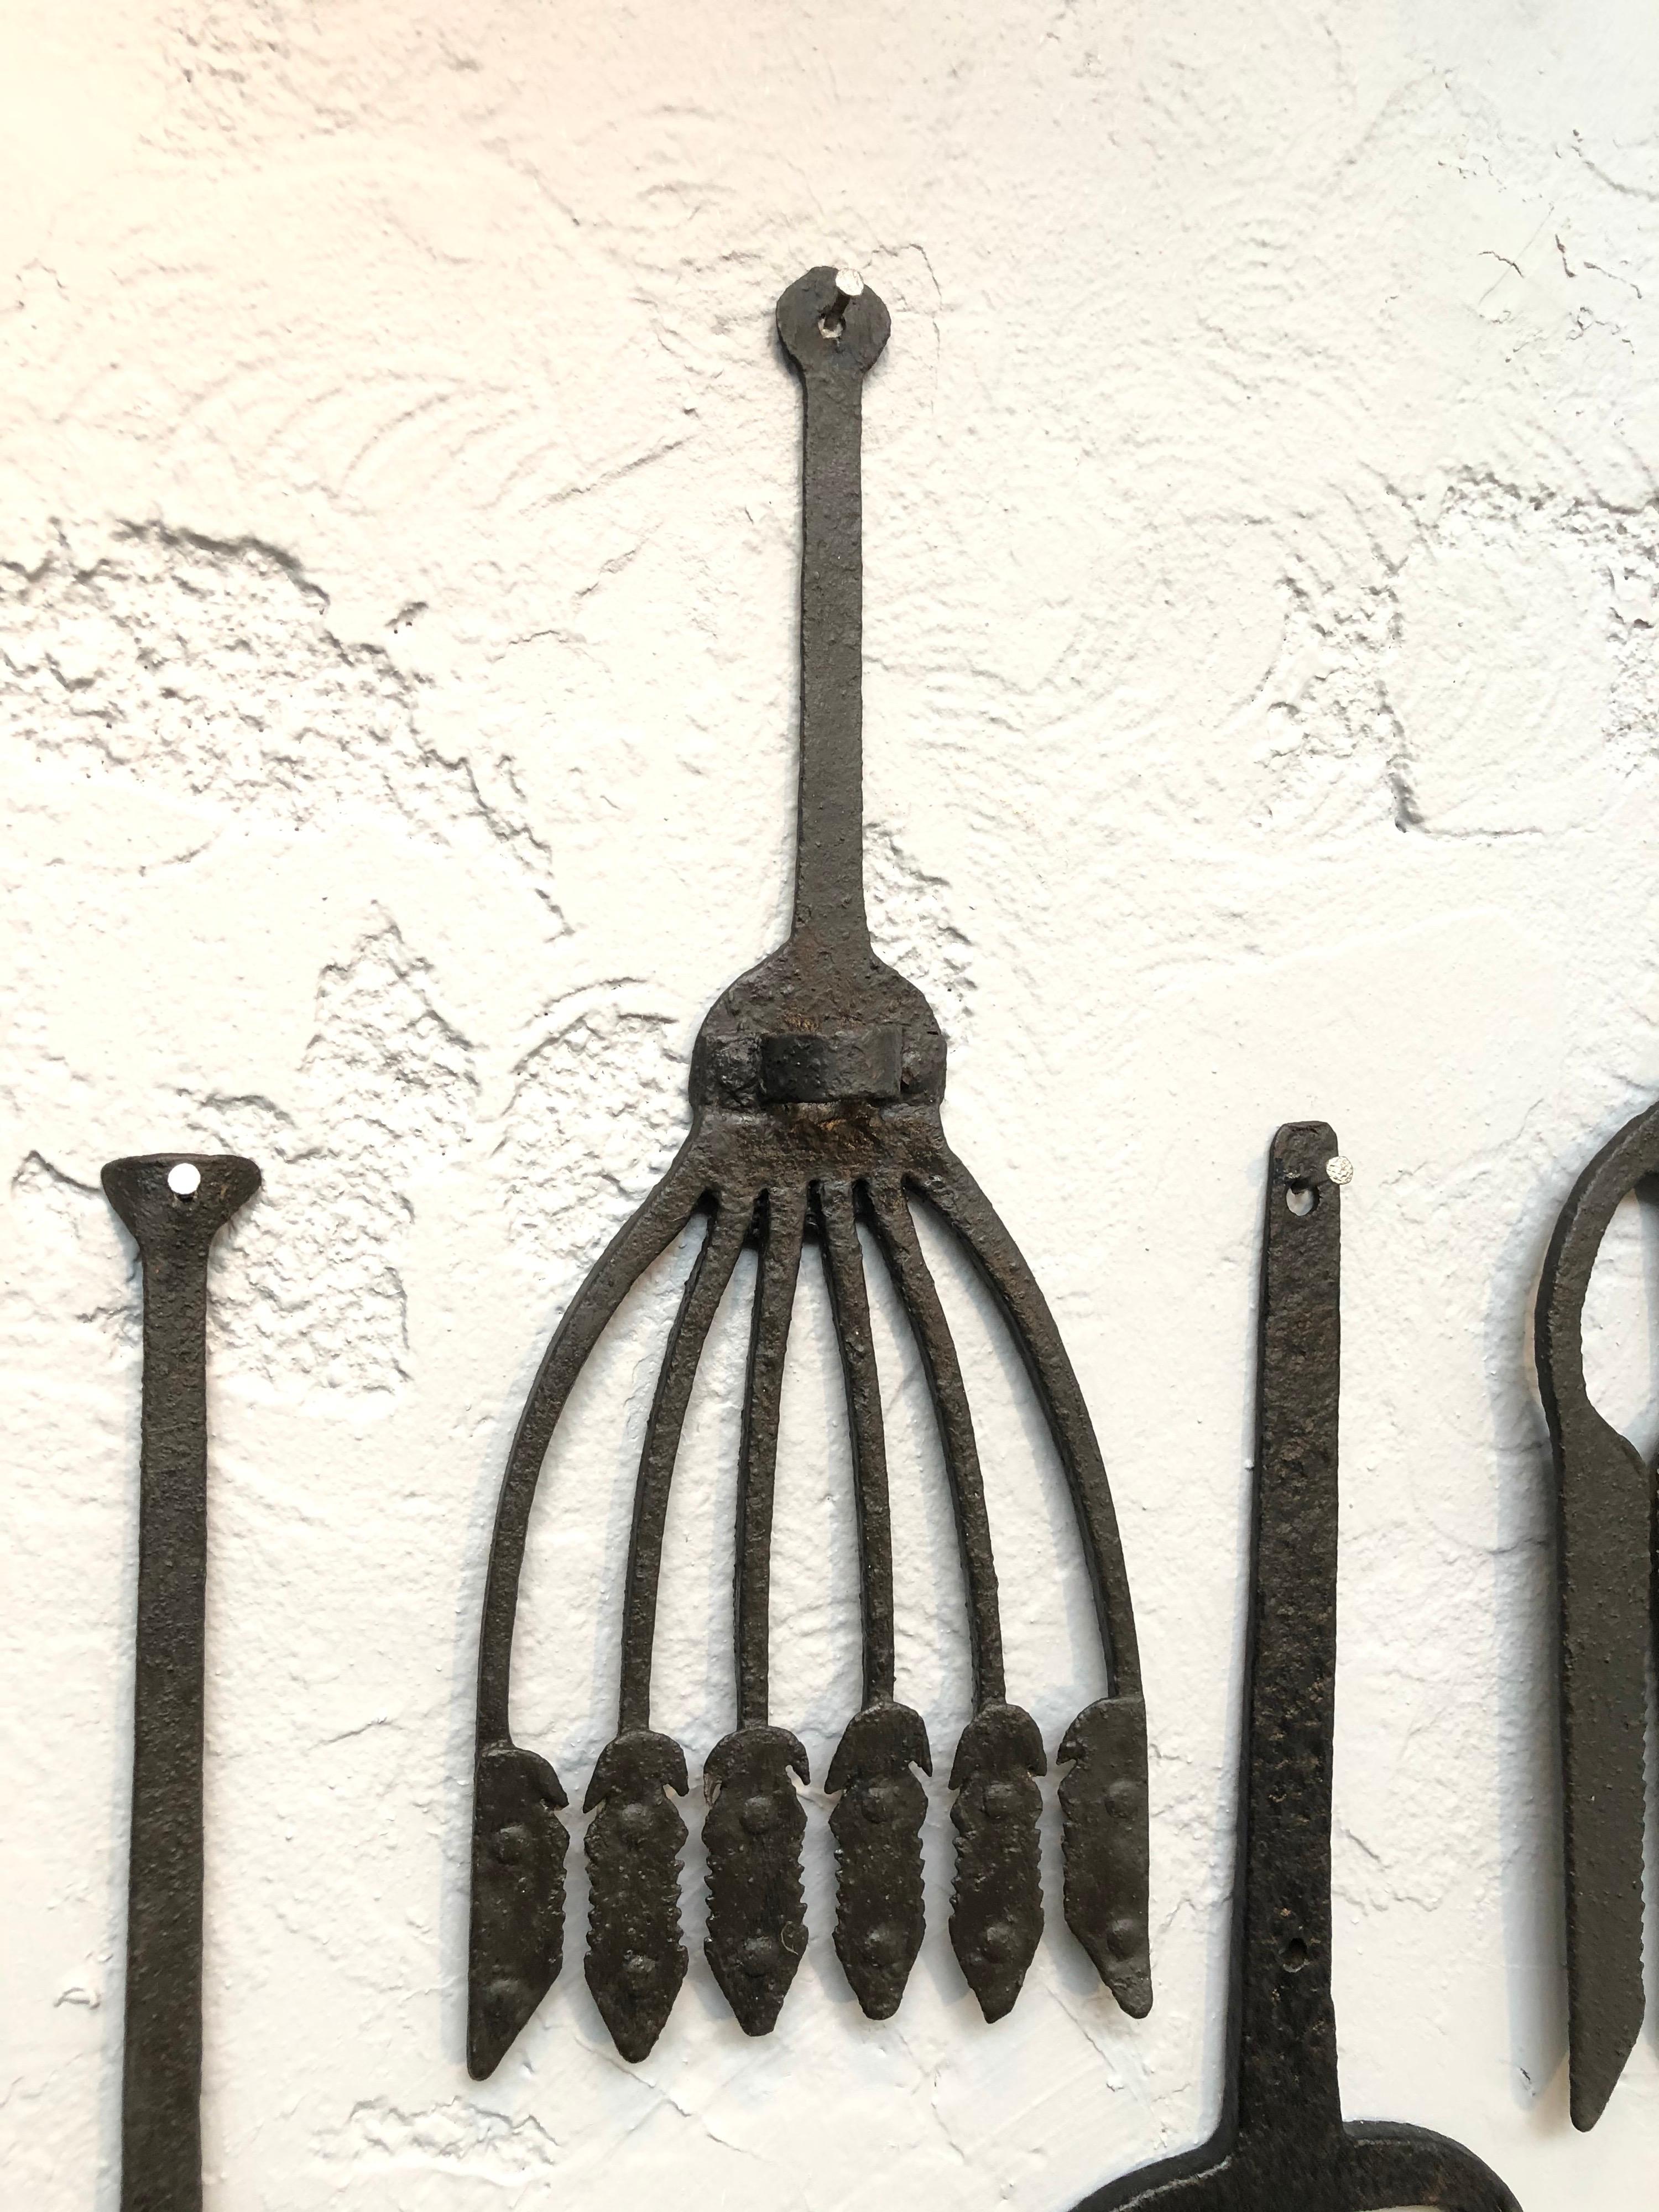 Collection of Antique Wrought Iron Eel Forks 1